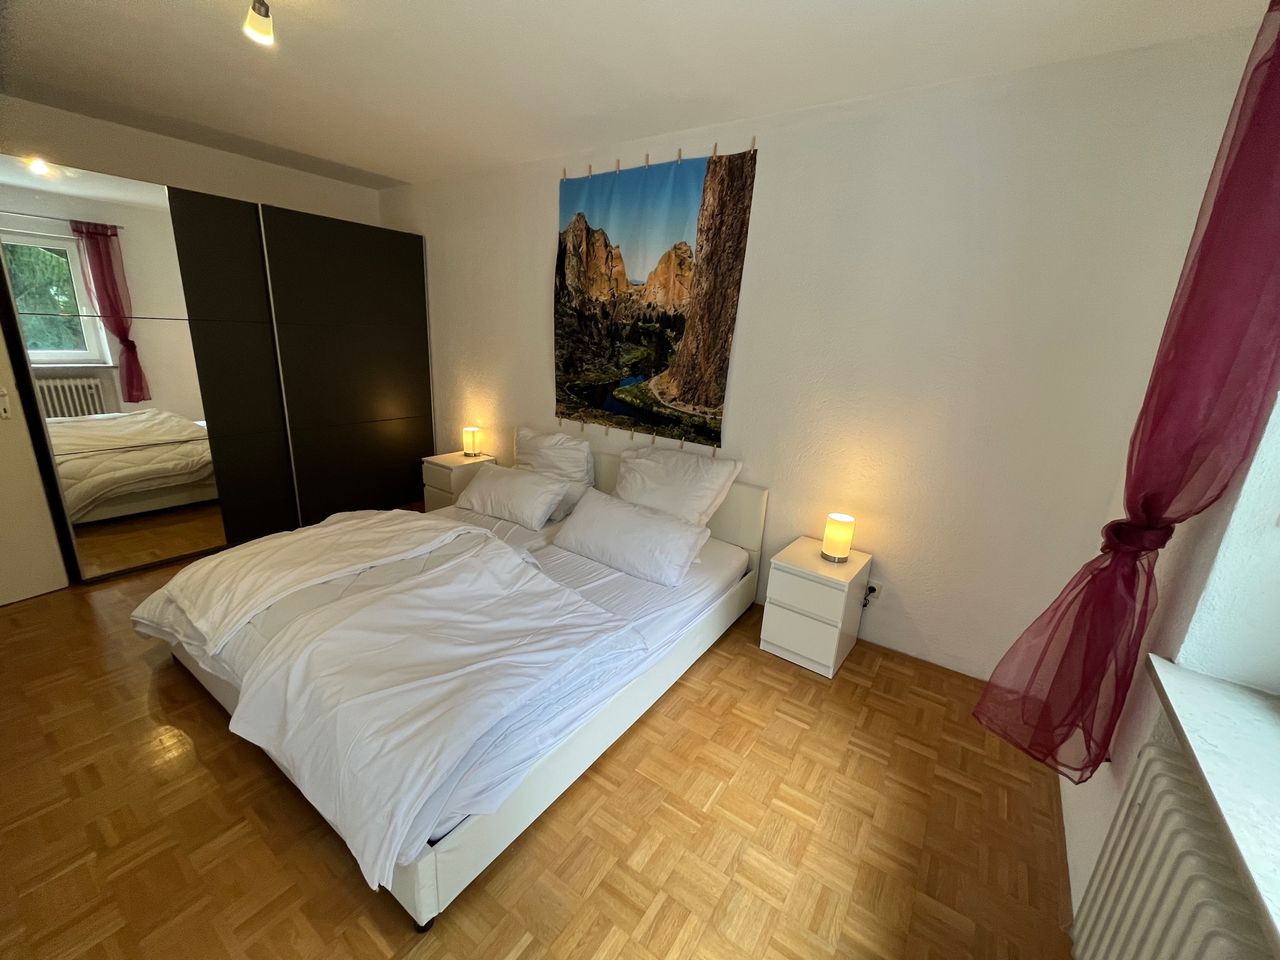 Fully furnished flat in central Regensburg with balcony